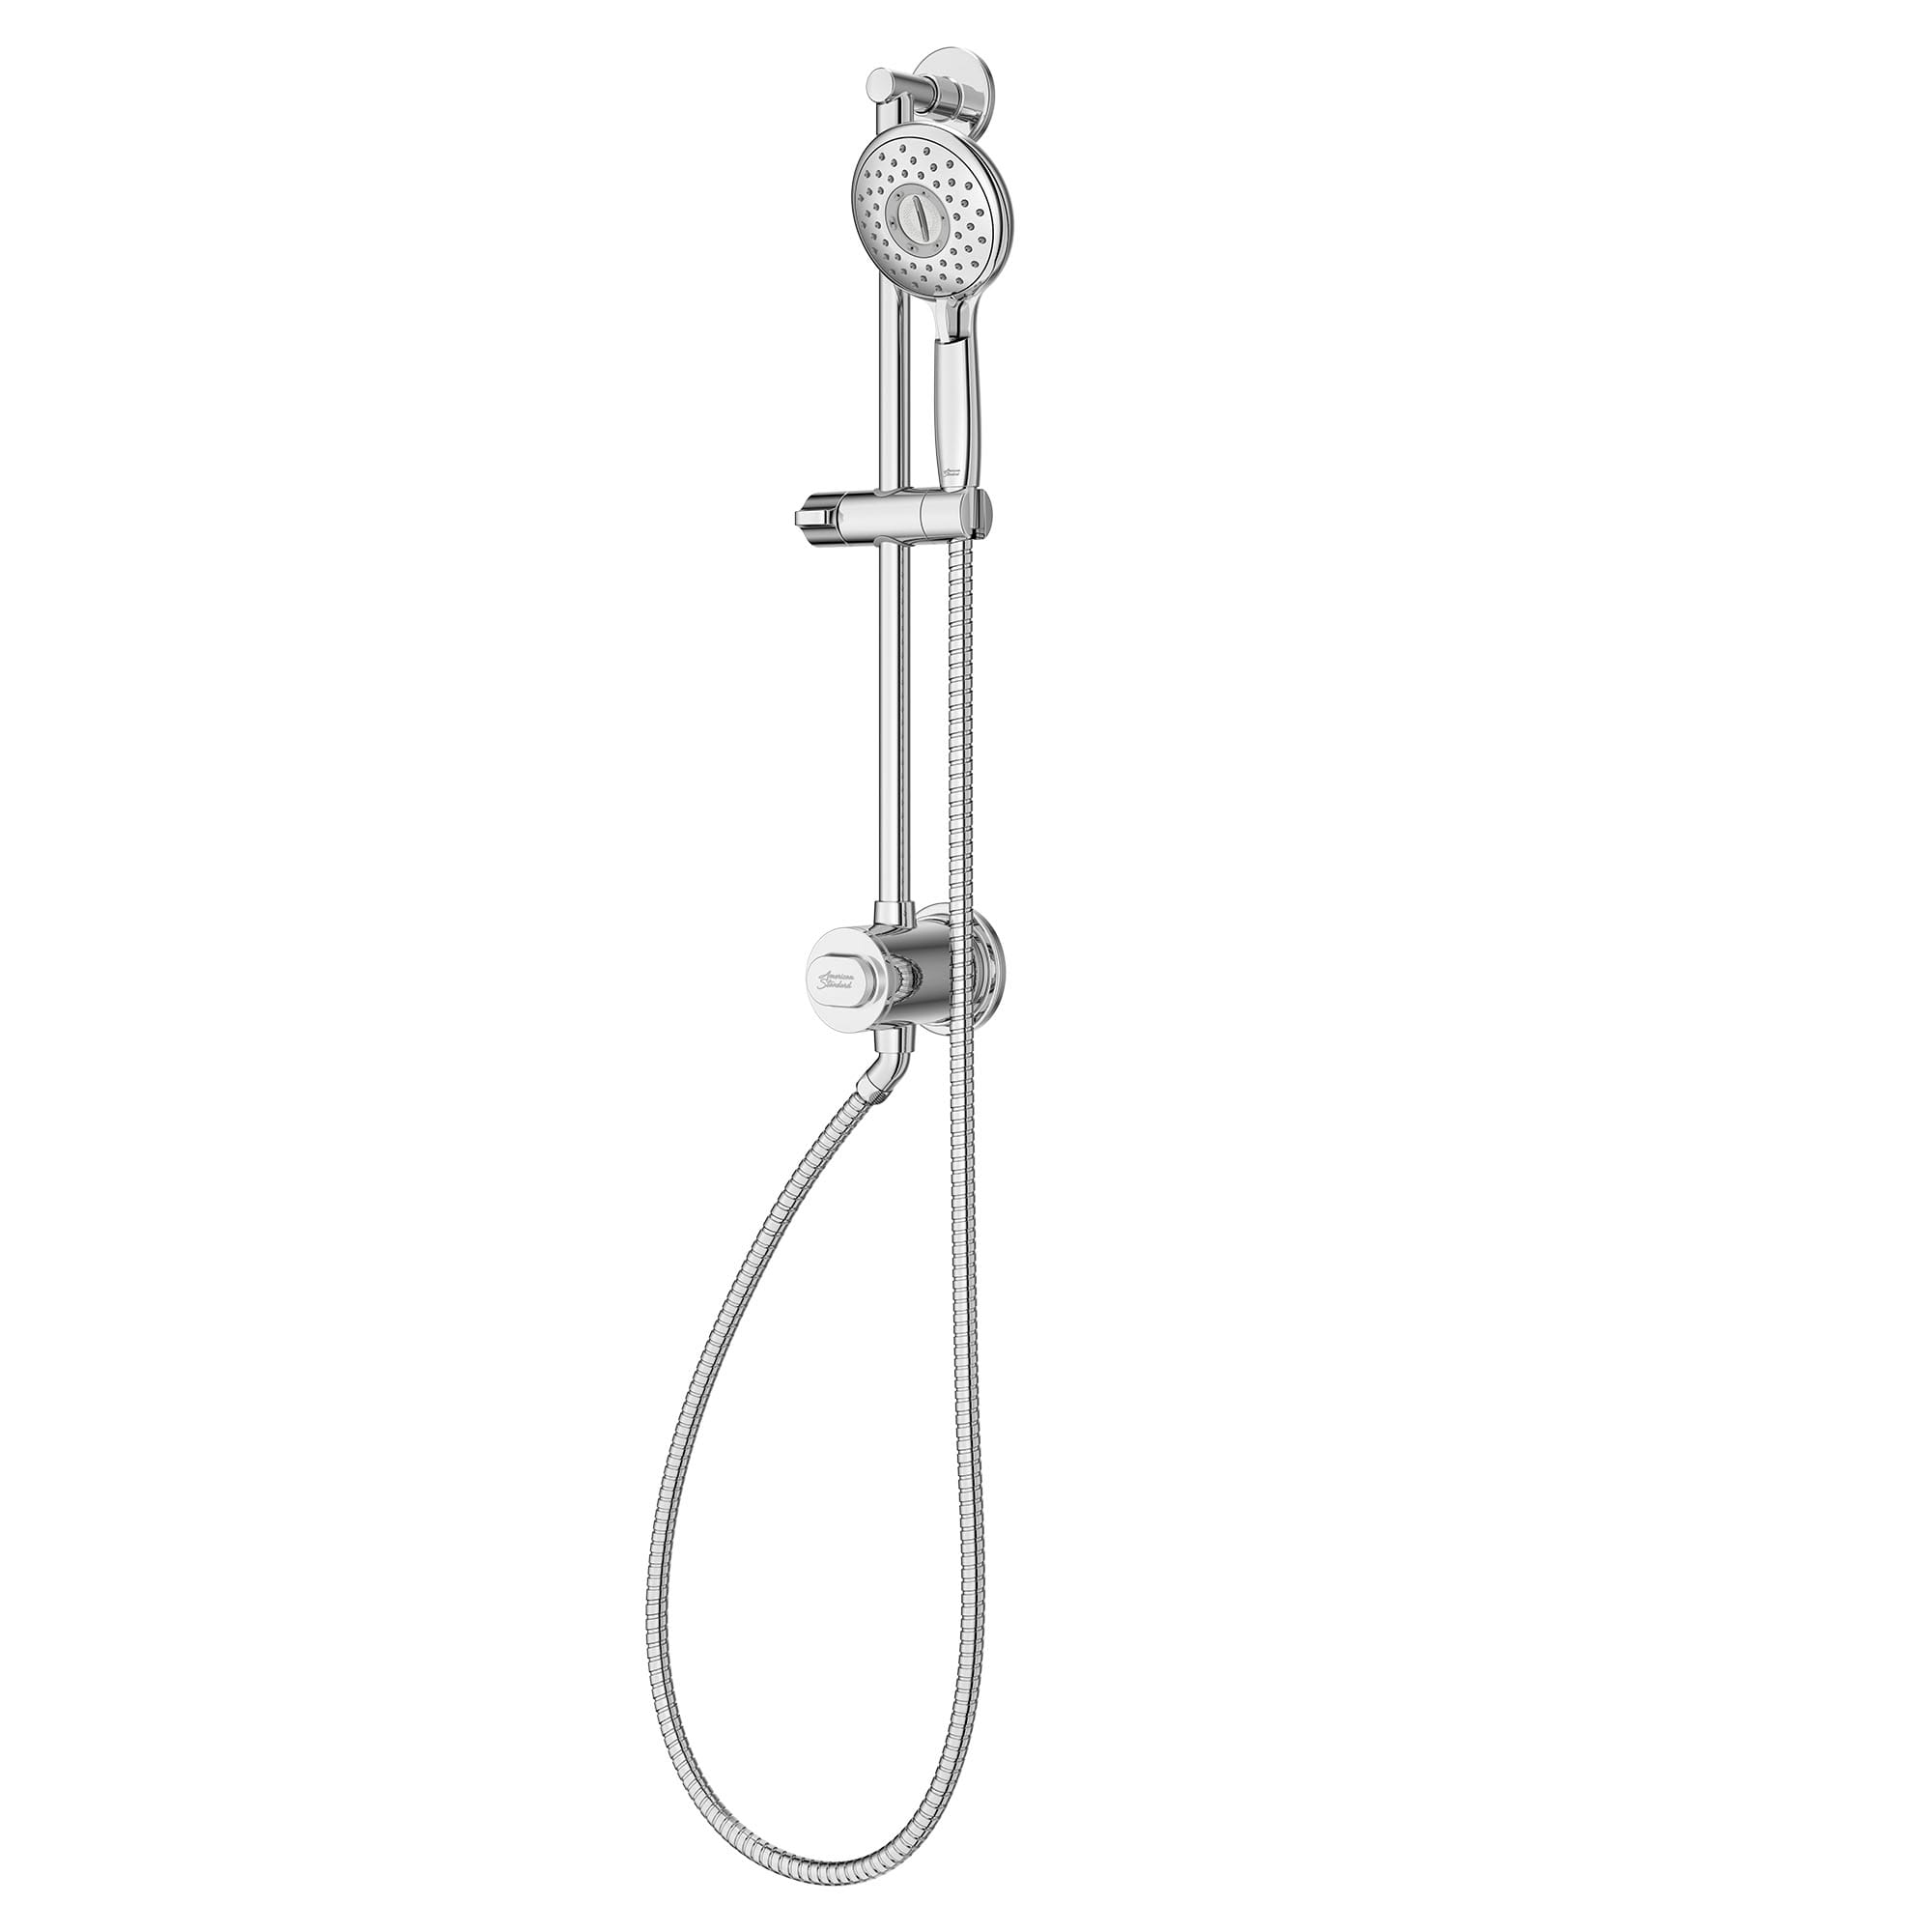 Retail $242 Hvy Duty Qualit American Standard Modern Hand Shower With Rail Sugg 